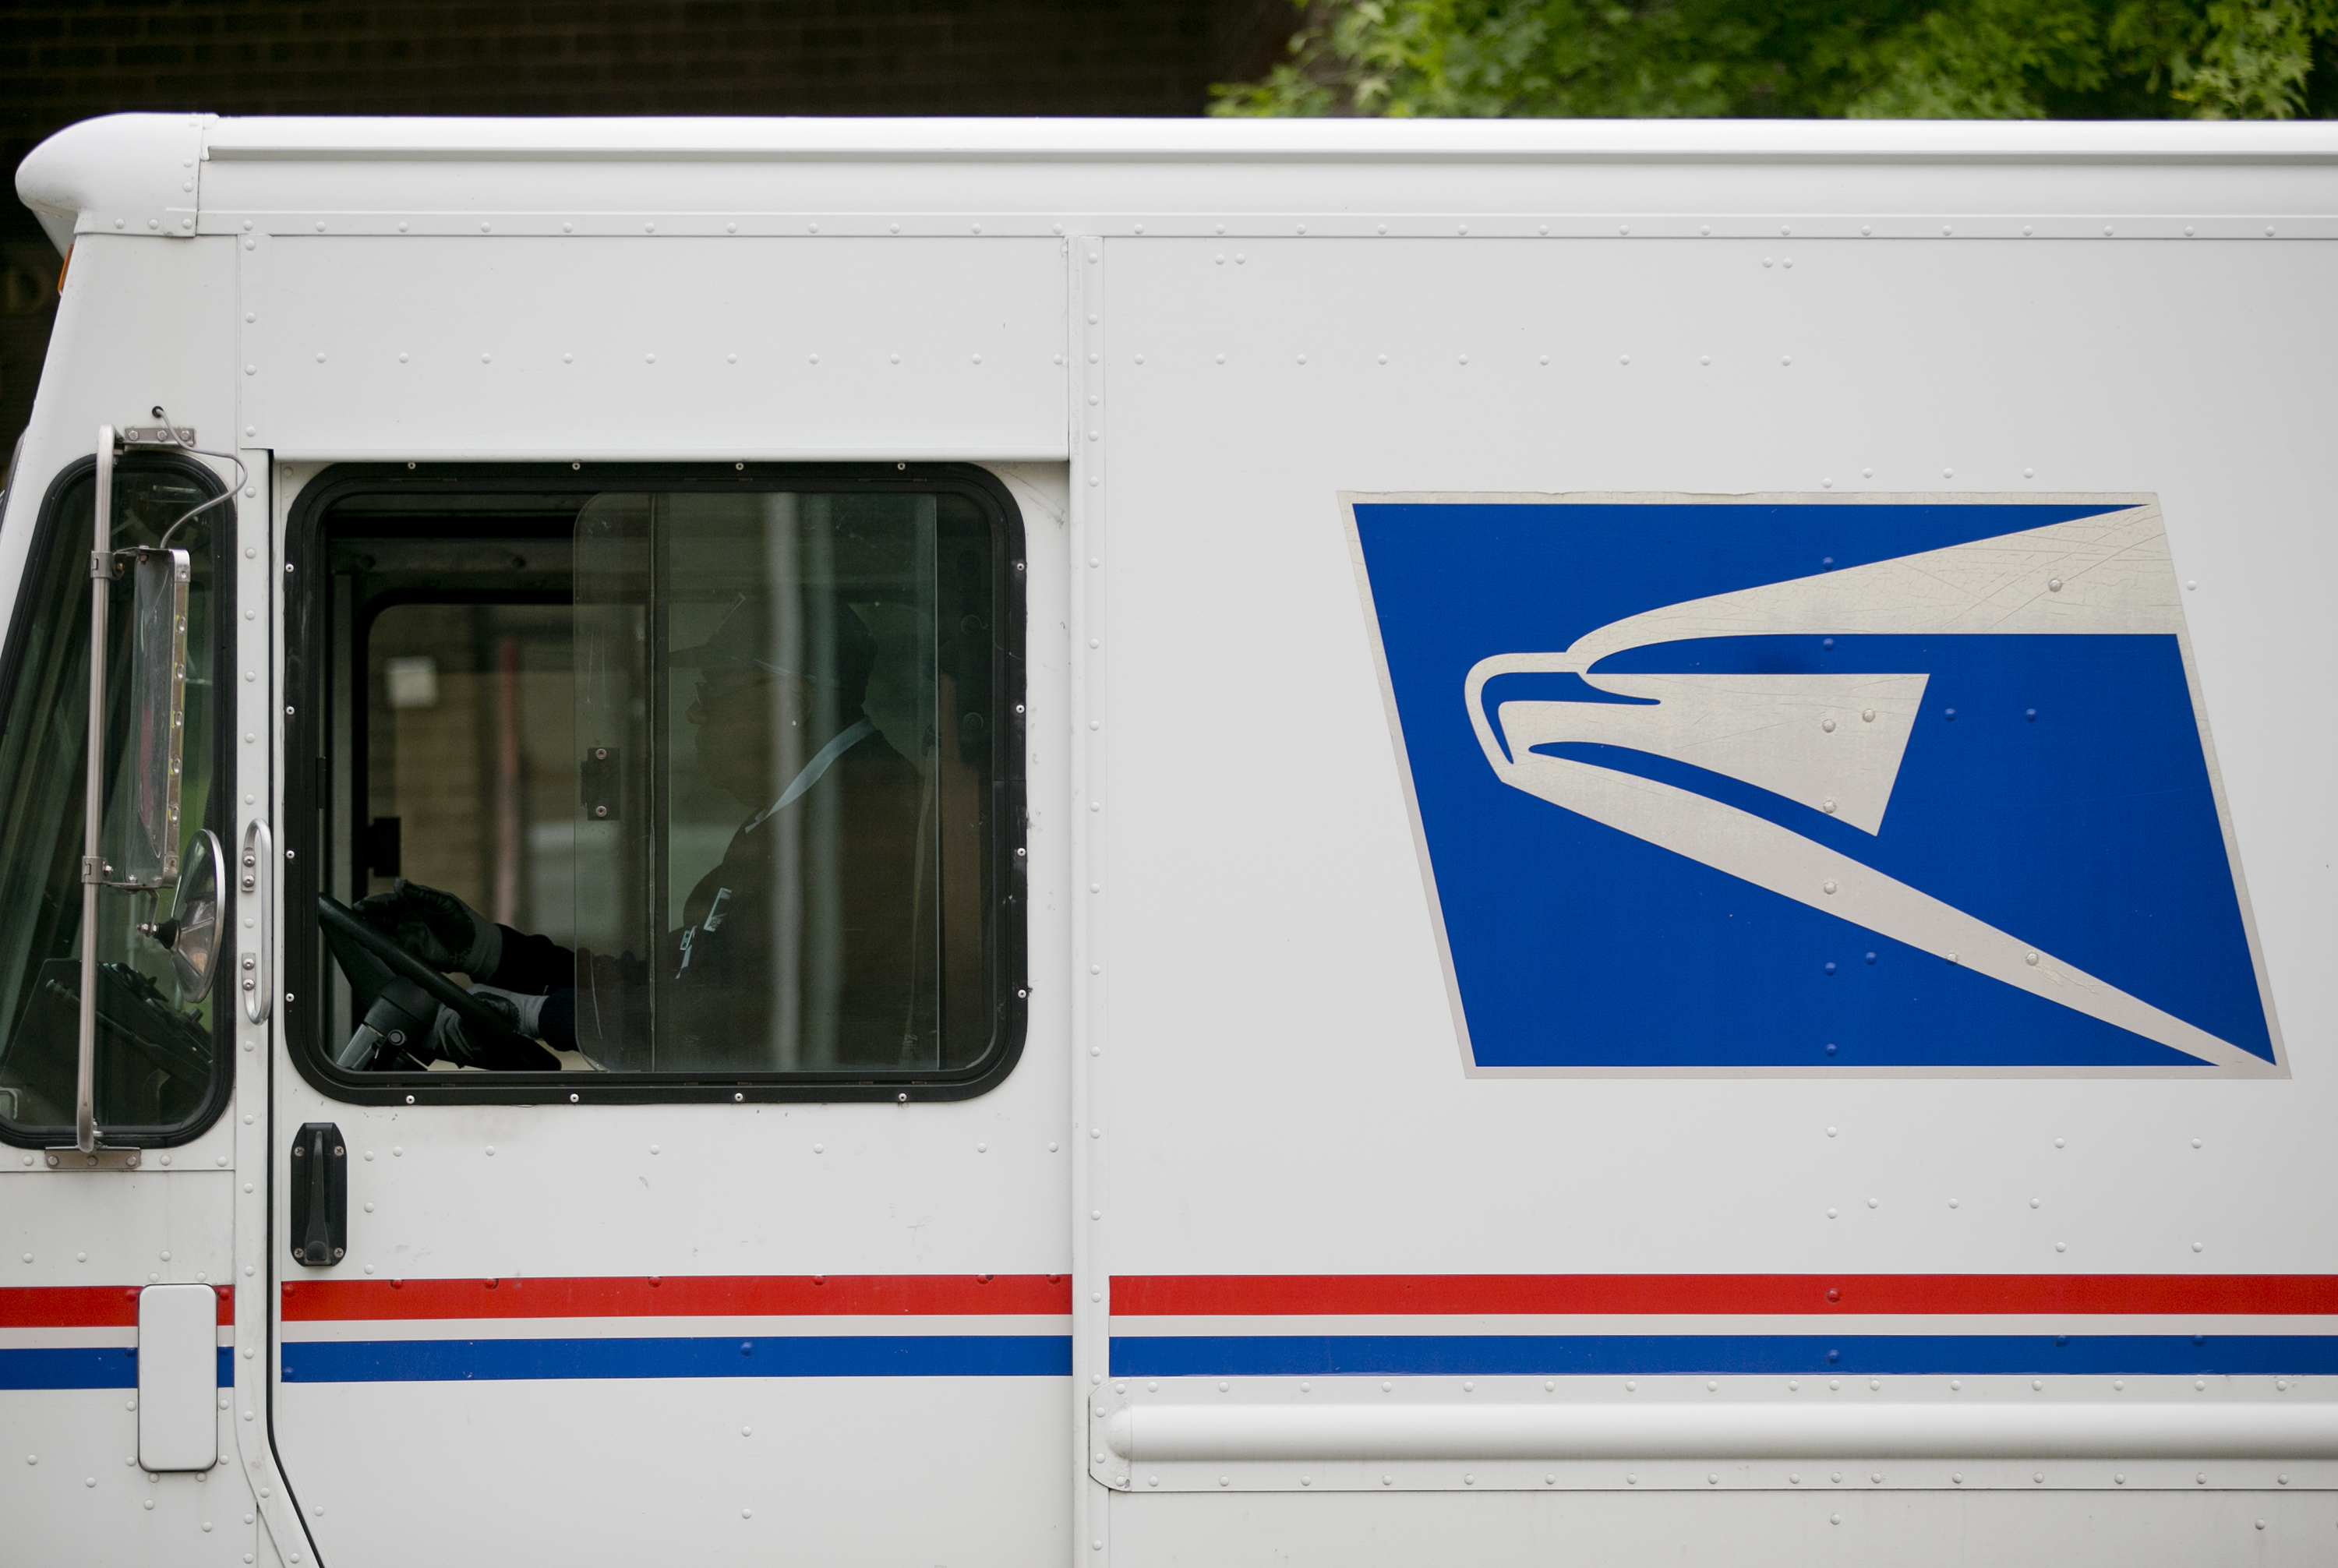 The U.S. Postal Service (USPS) logo is seen on the side of a delivery truck in Washington, D.C., U.S., on Thursday, May 9, 2013. (Bloomberg&mdash;Bloomberg via Getty Images)